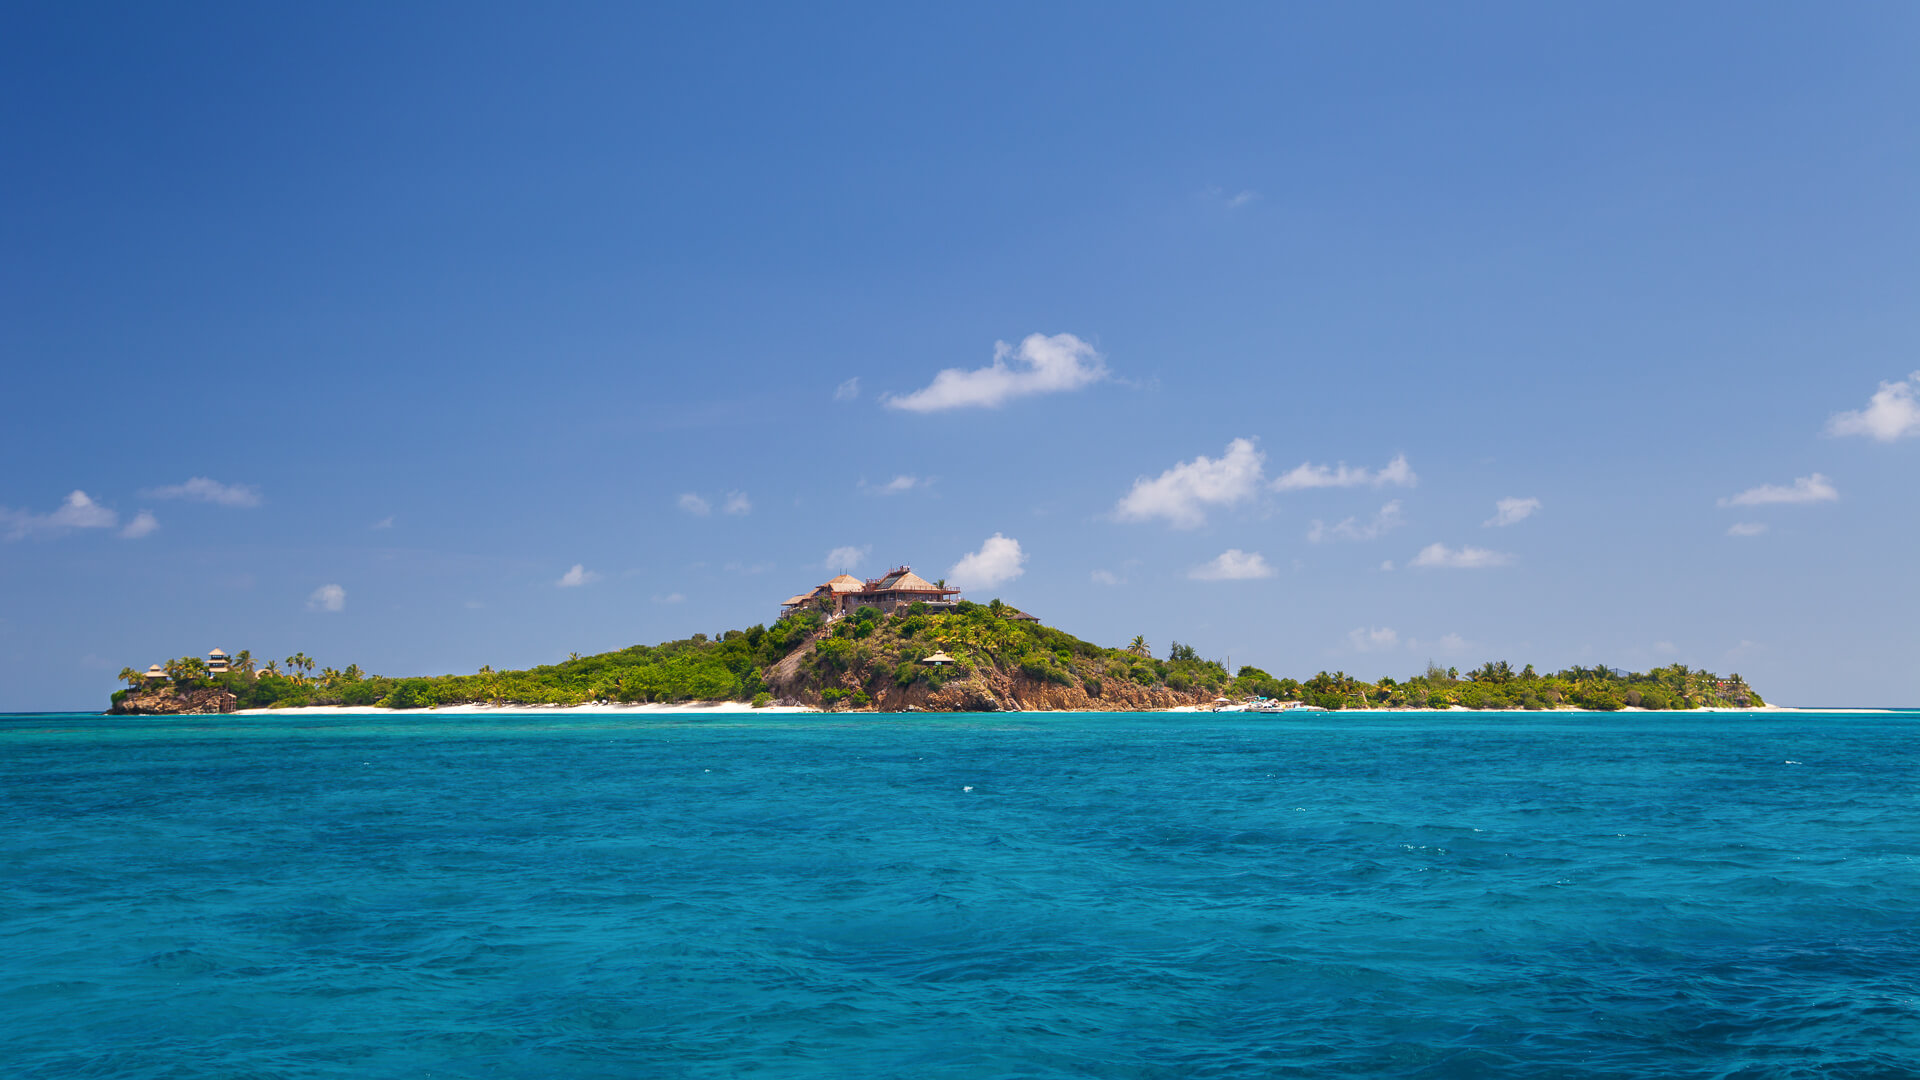 <p>AGLAIA's Walker recommends a stay on Richard Branson's private island, Necker Island.</p> <p>"For travelers who enjoy the beach and water activities, you can't go wrong with booking a trip to Necker Island in the British Virgin Islands," she said. "Necker Island is one of the most exclusive private islands in the world, offering incredible dining experiences, plenty of activities, legendary events and a deep commitment to conservation." </p> <p>You can book the whole island for up to 48 guests for $128,000 per night, which means you can stay for a week if you have $1 million to spare.</p>